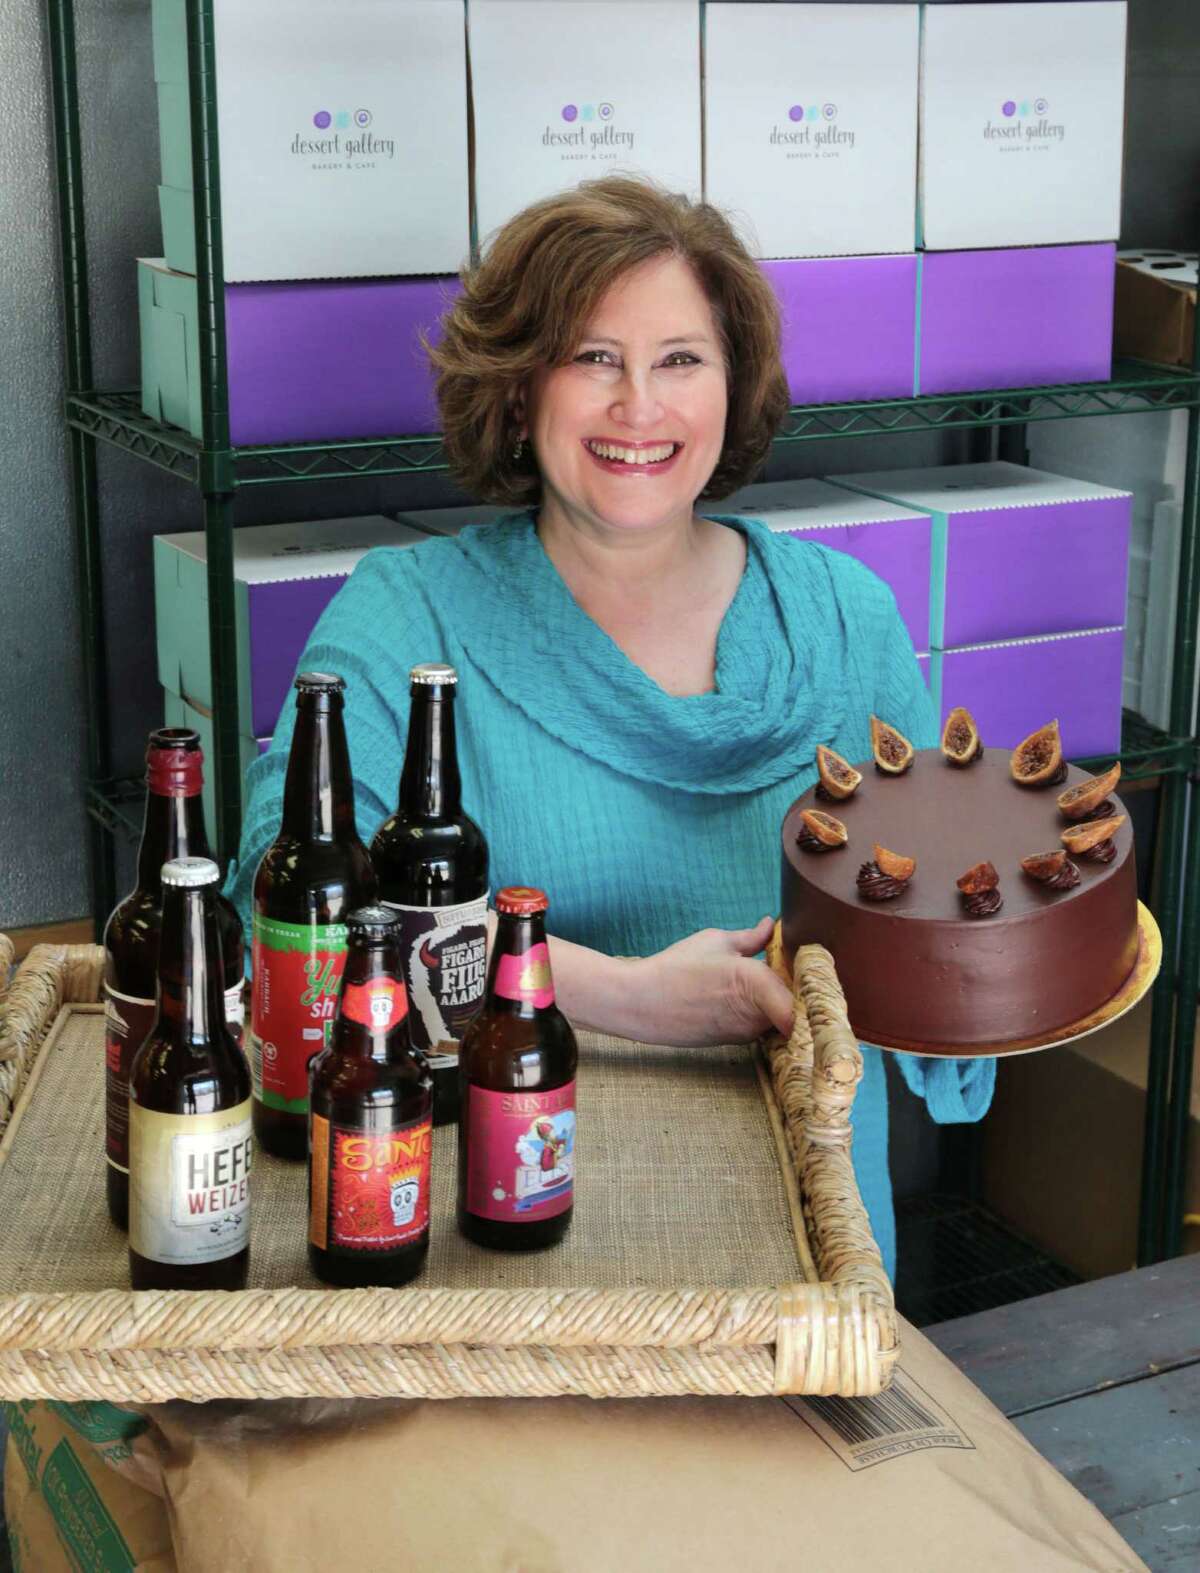 Sara Brook owner of the Dessert Gallery, holds up a Figaro Figaro Fiigaaaro Chocolate Torte made with beer from Buffalo Brewing Co. Wednesday, April 29, 2015 in Houston, Texas. The cake is filled with beer-soaked figs and raisins and topped with dark chocolate ganache The Dessert Gallery, will be featuring locally brewed craft beers in their upcoming Dessert of the Month program. (Billy Smith II / Houston Chronicle)